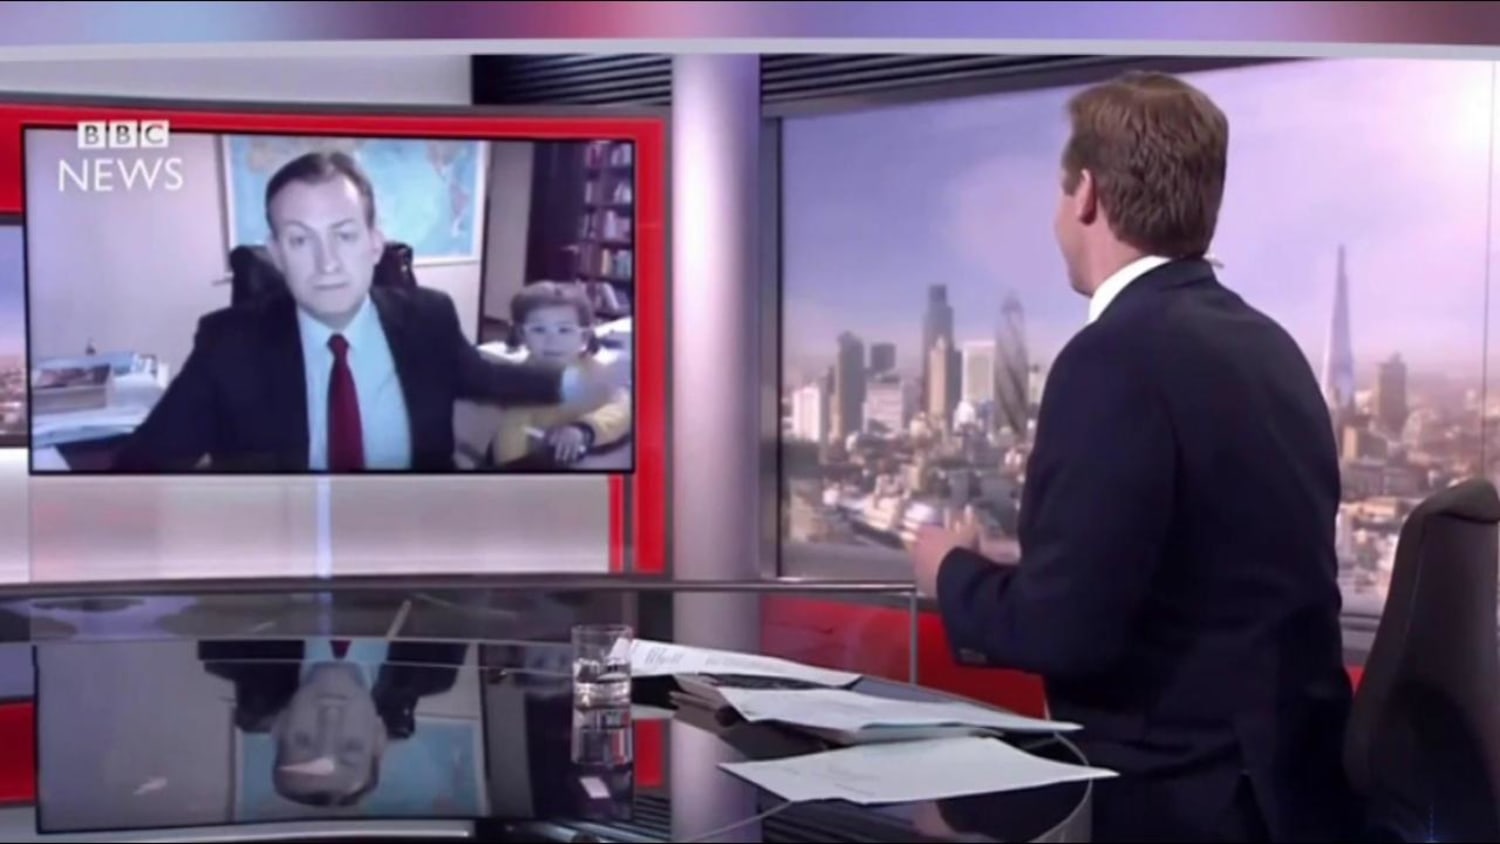 Hilarious and Relatable Video Shows Children Interrupt BBC Interview